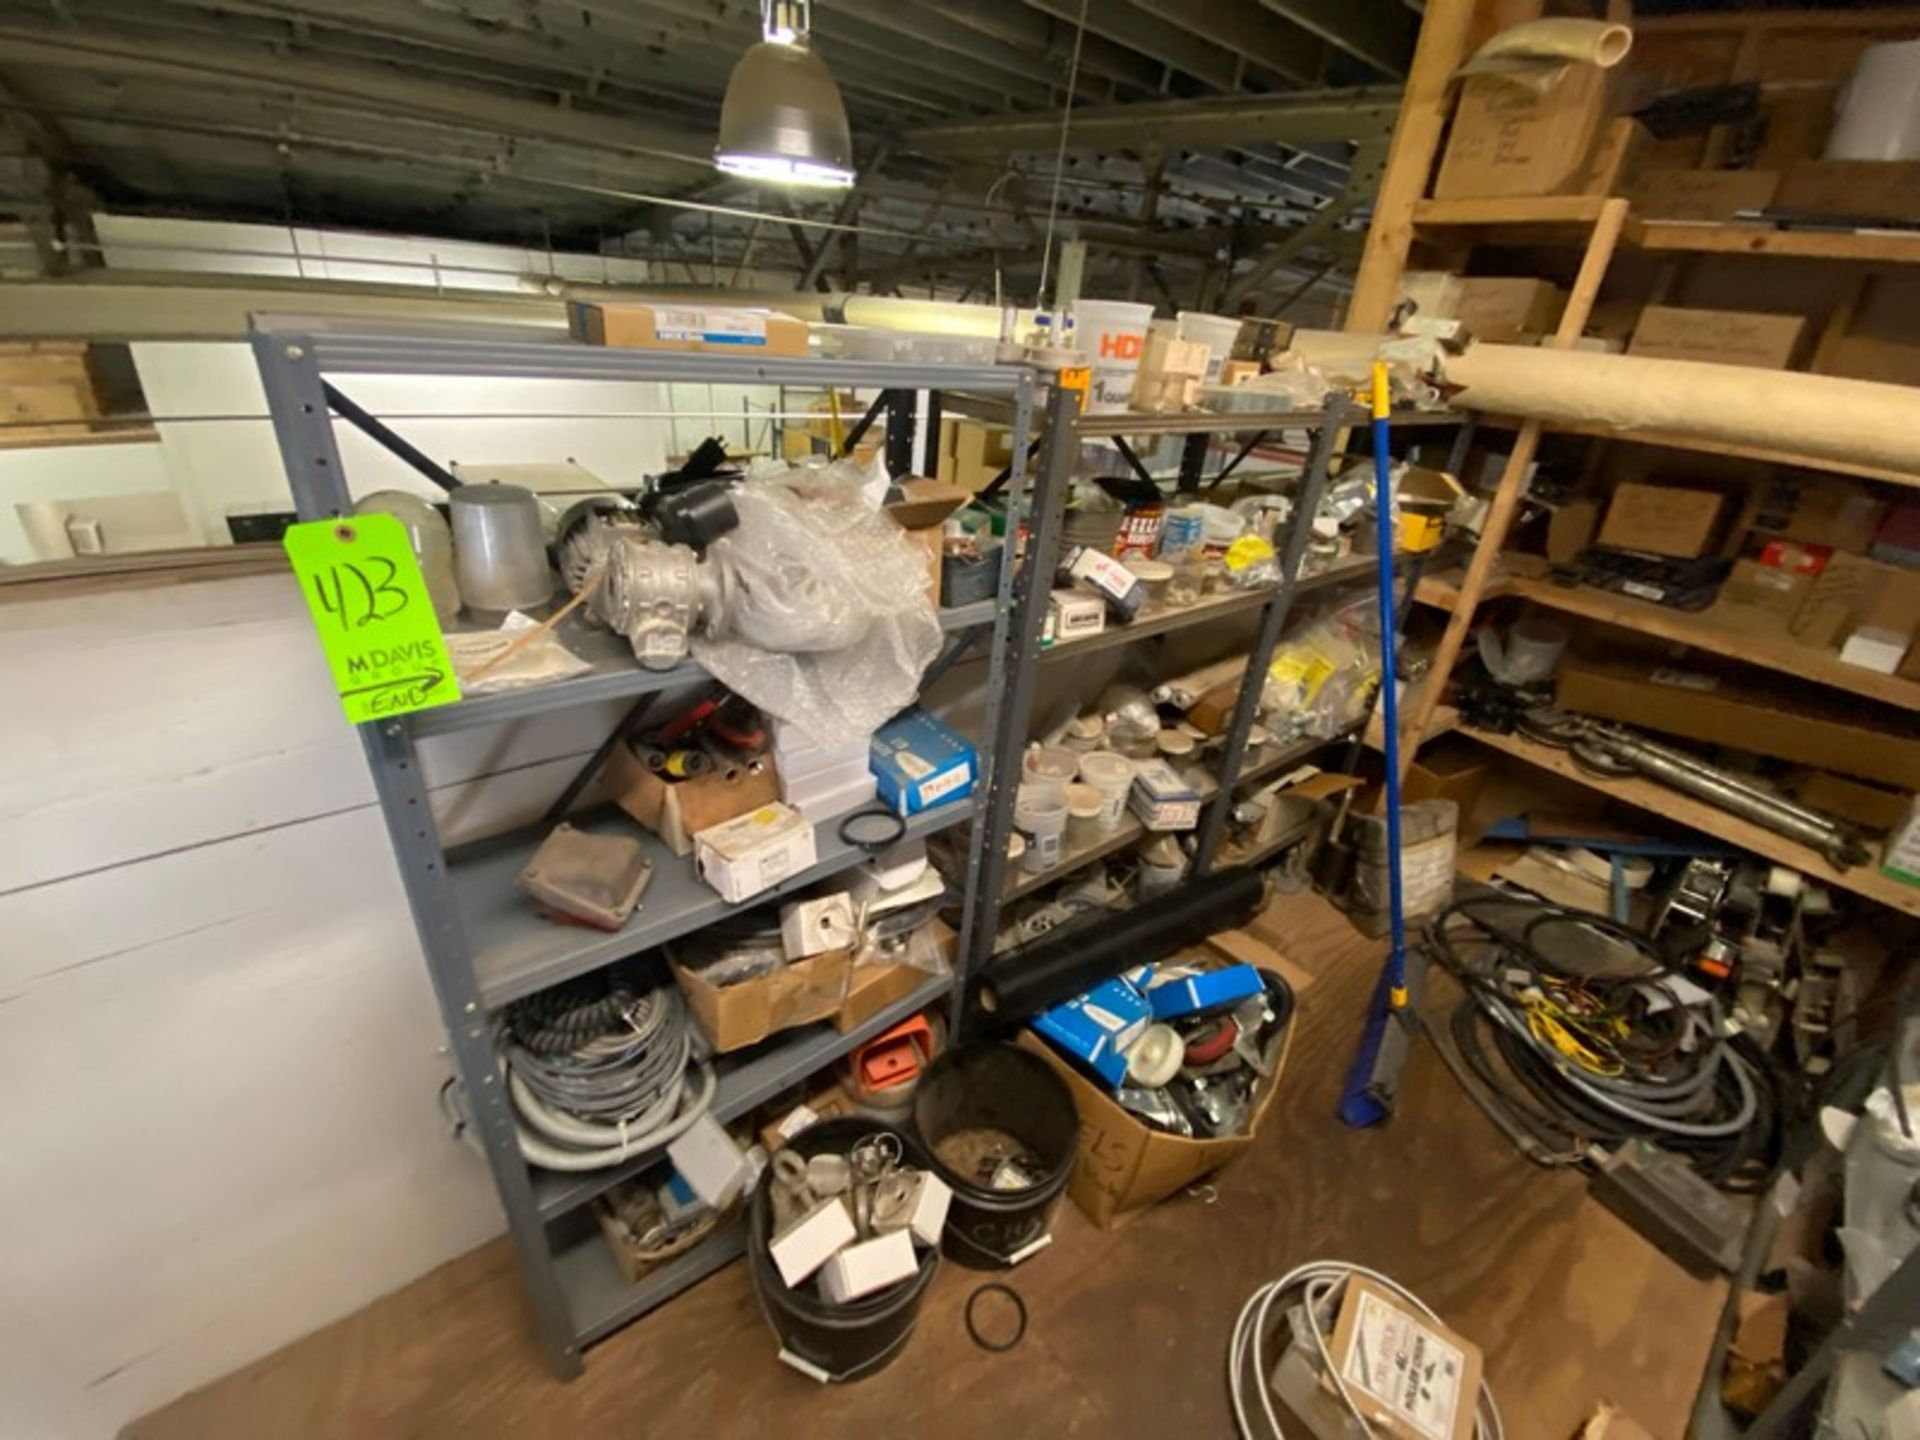 CONTENTS OF MIDDLE SHELVING UNITS, INCLUDES BELTS, ASSORTED ELECTRICAL PLUGS, LIGHT PROTECTION UNITS